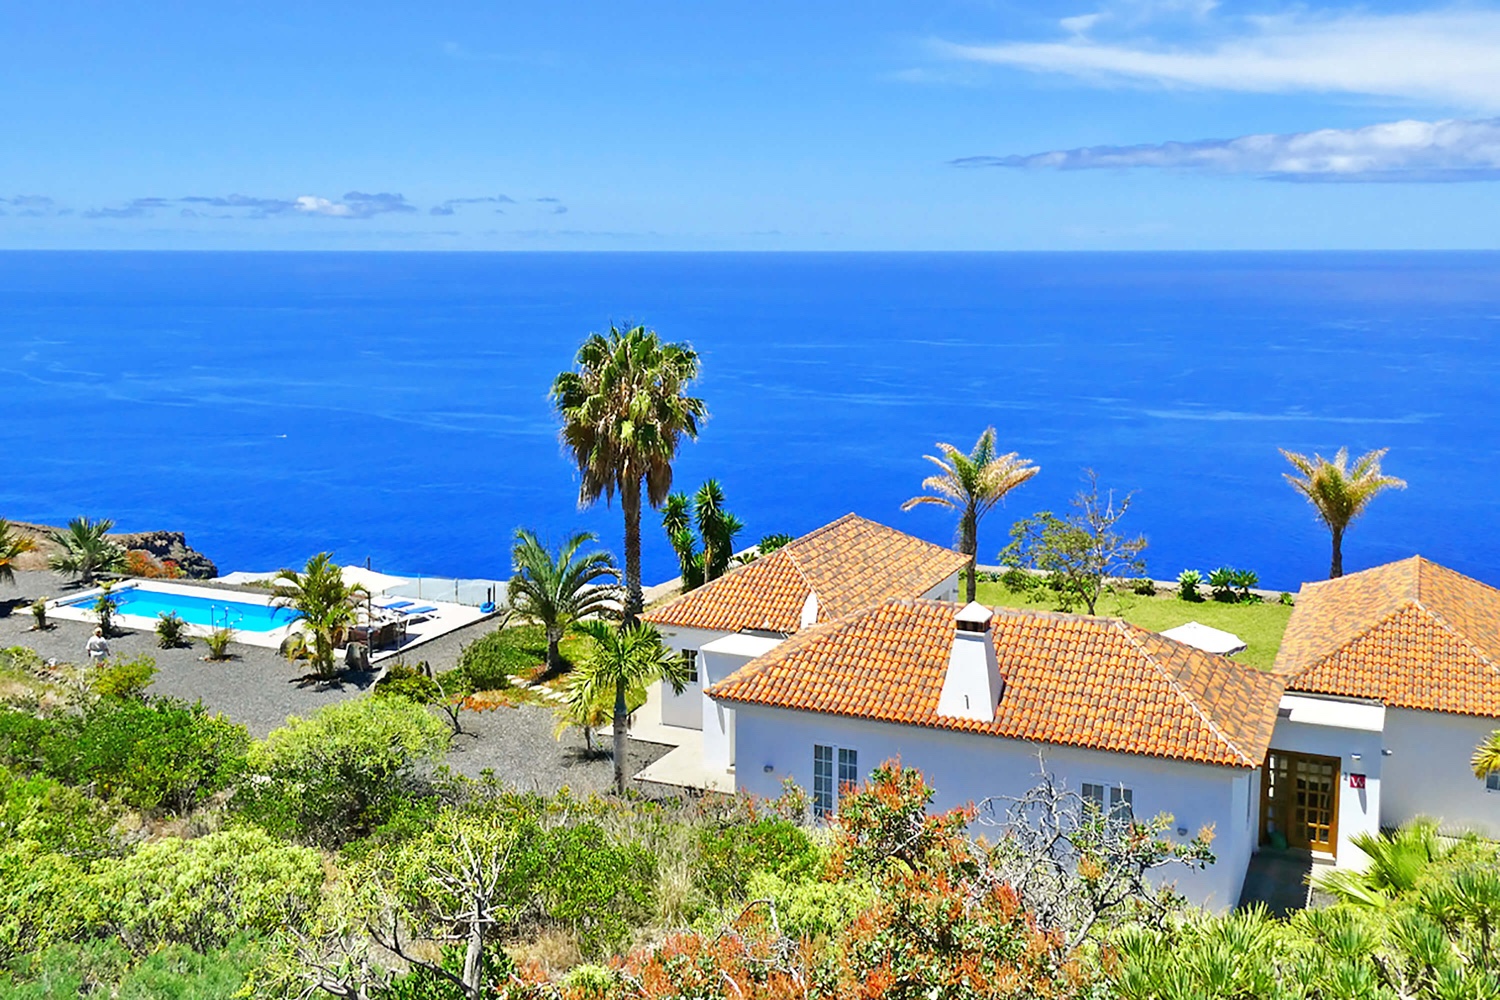 Very nice modern house with private pool and stunning panoramic views of the Atlantic Ocean. The very well equipped holiday home is ideal for a holiday on La Palma with all comforts.